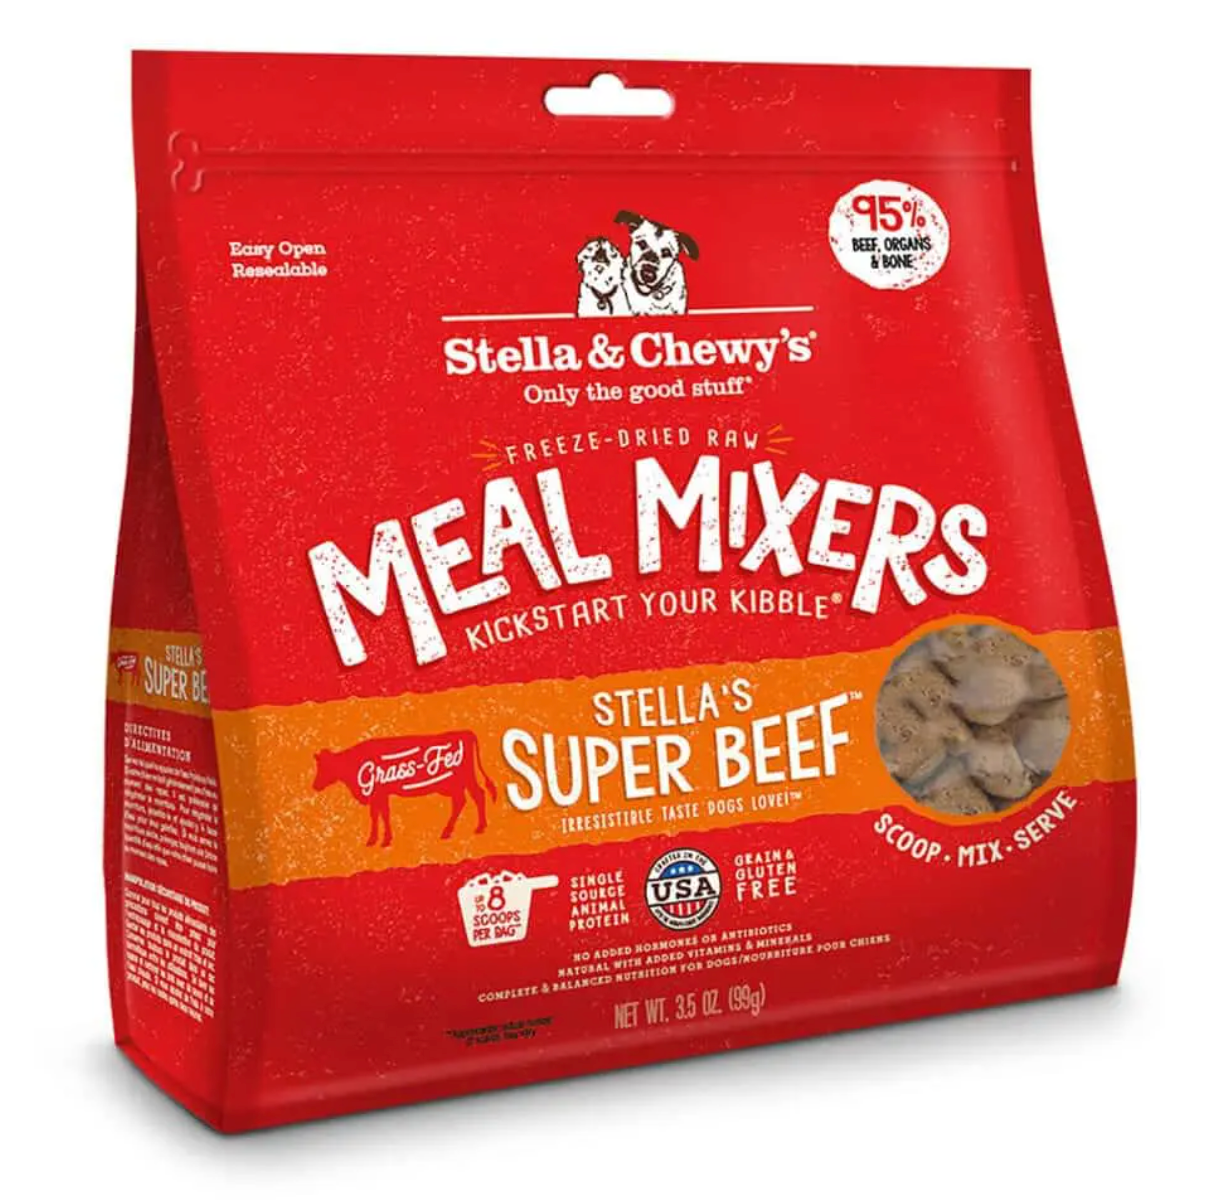 Stella & Chewy's Super Beef Freeze Dried Meal Mixers 18 oz